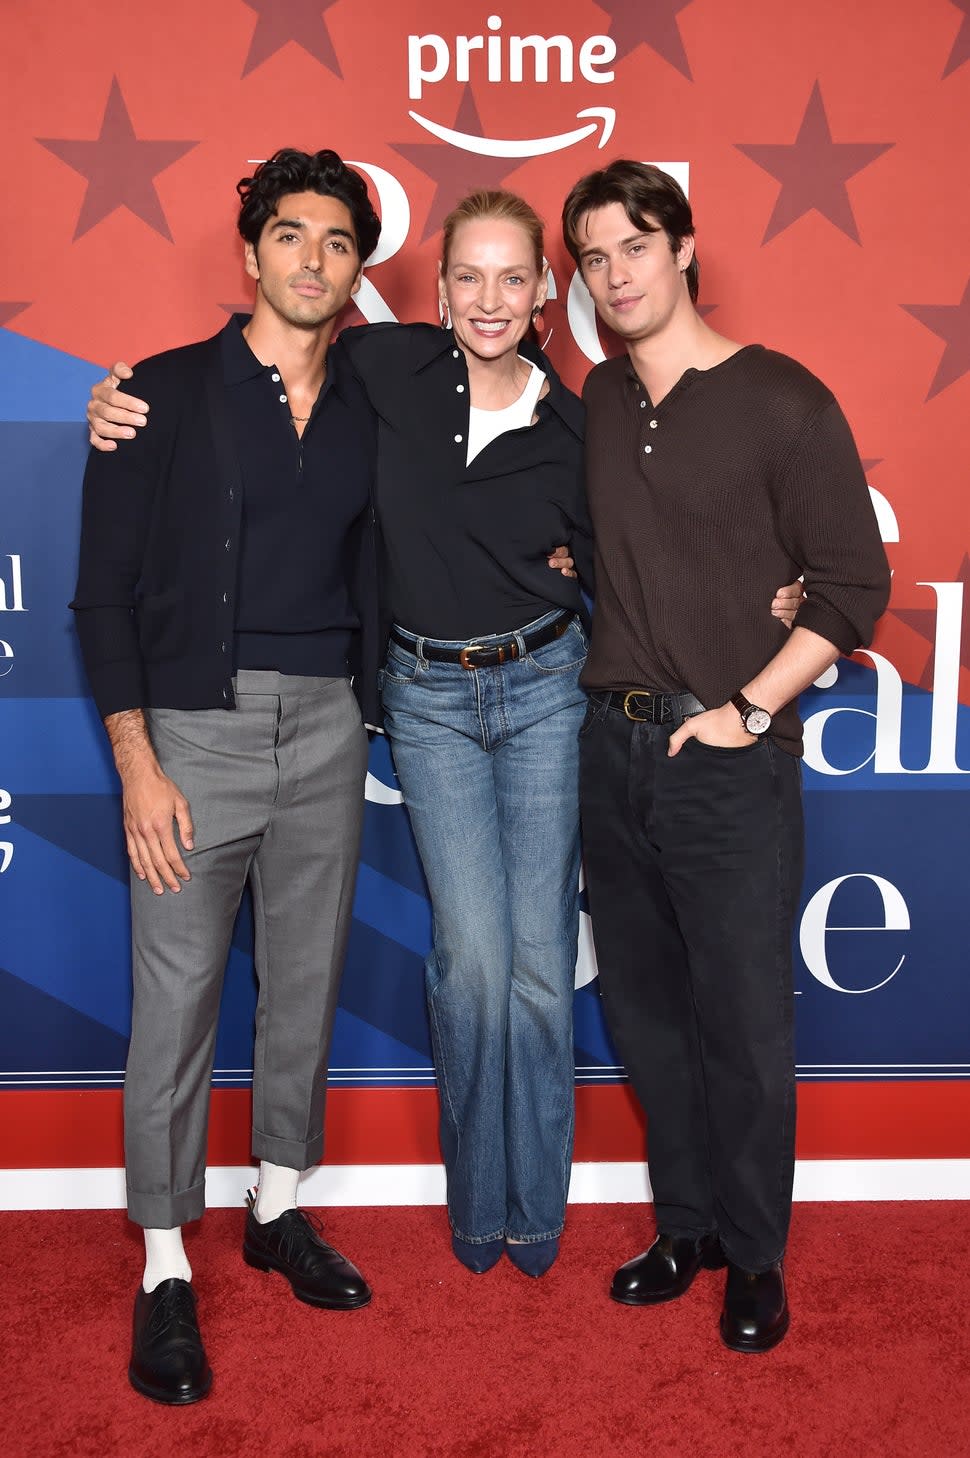 Nicholas Galitzine, Uma Thurman and Taylor Zakhar Perez attend a 'Red, White & Royal Blue' fan screening in Los Angeles.